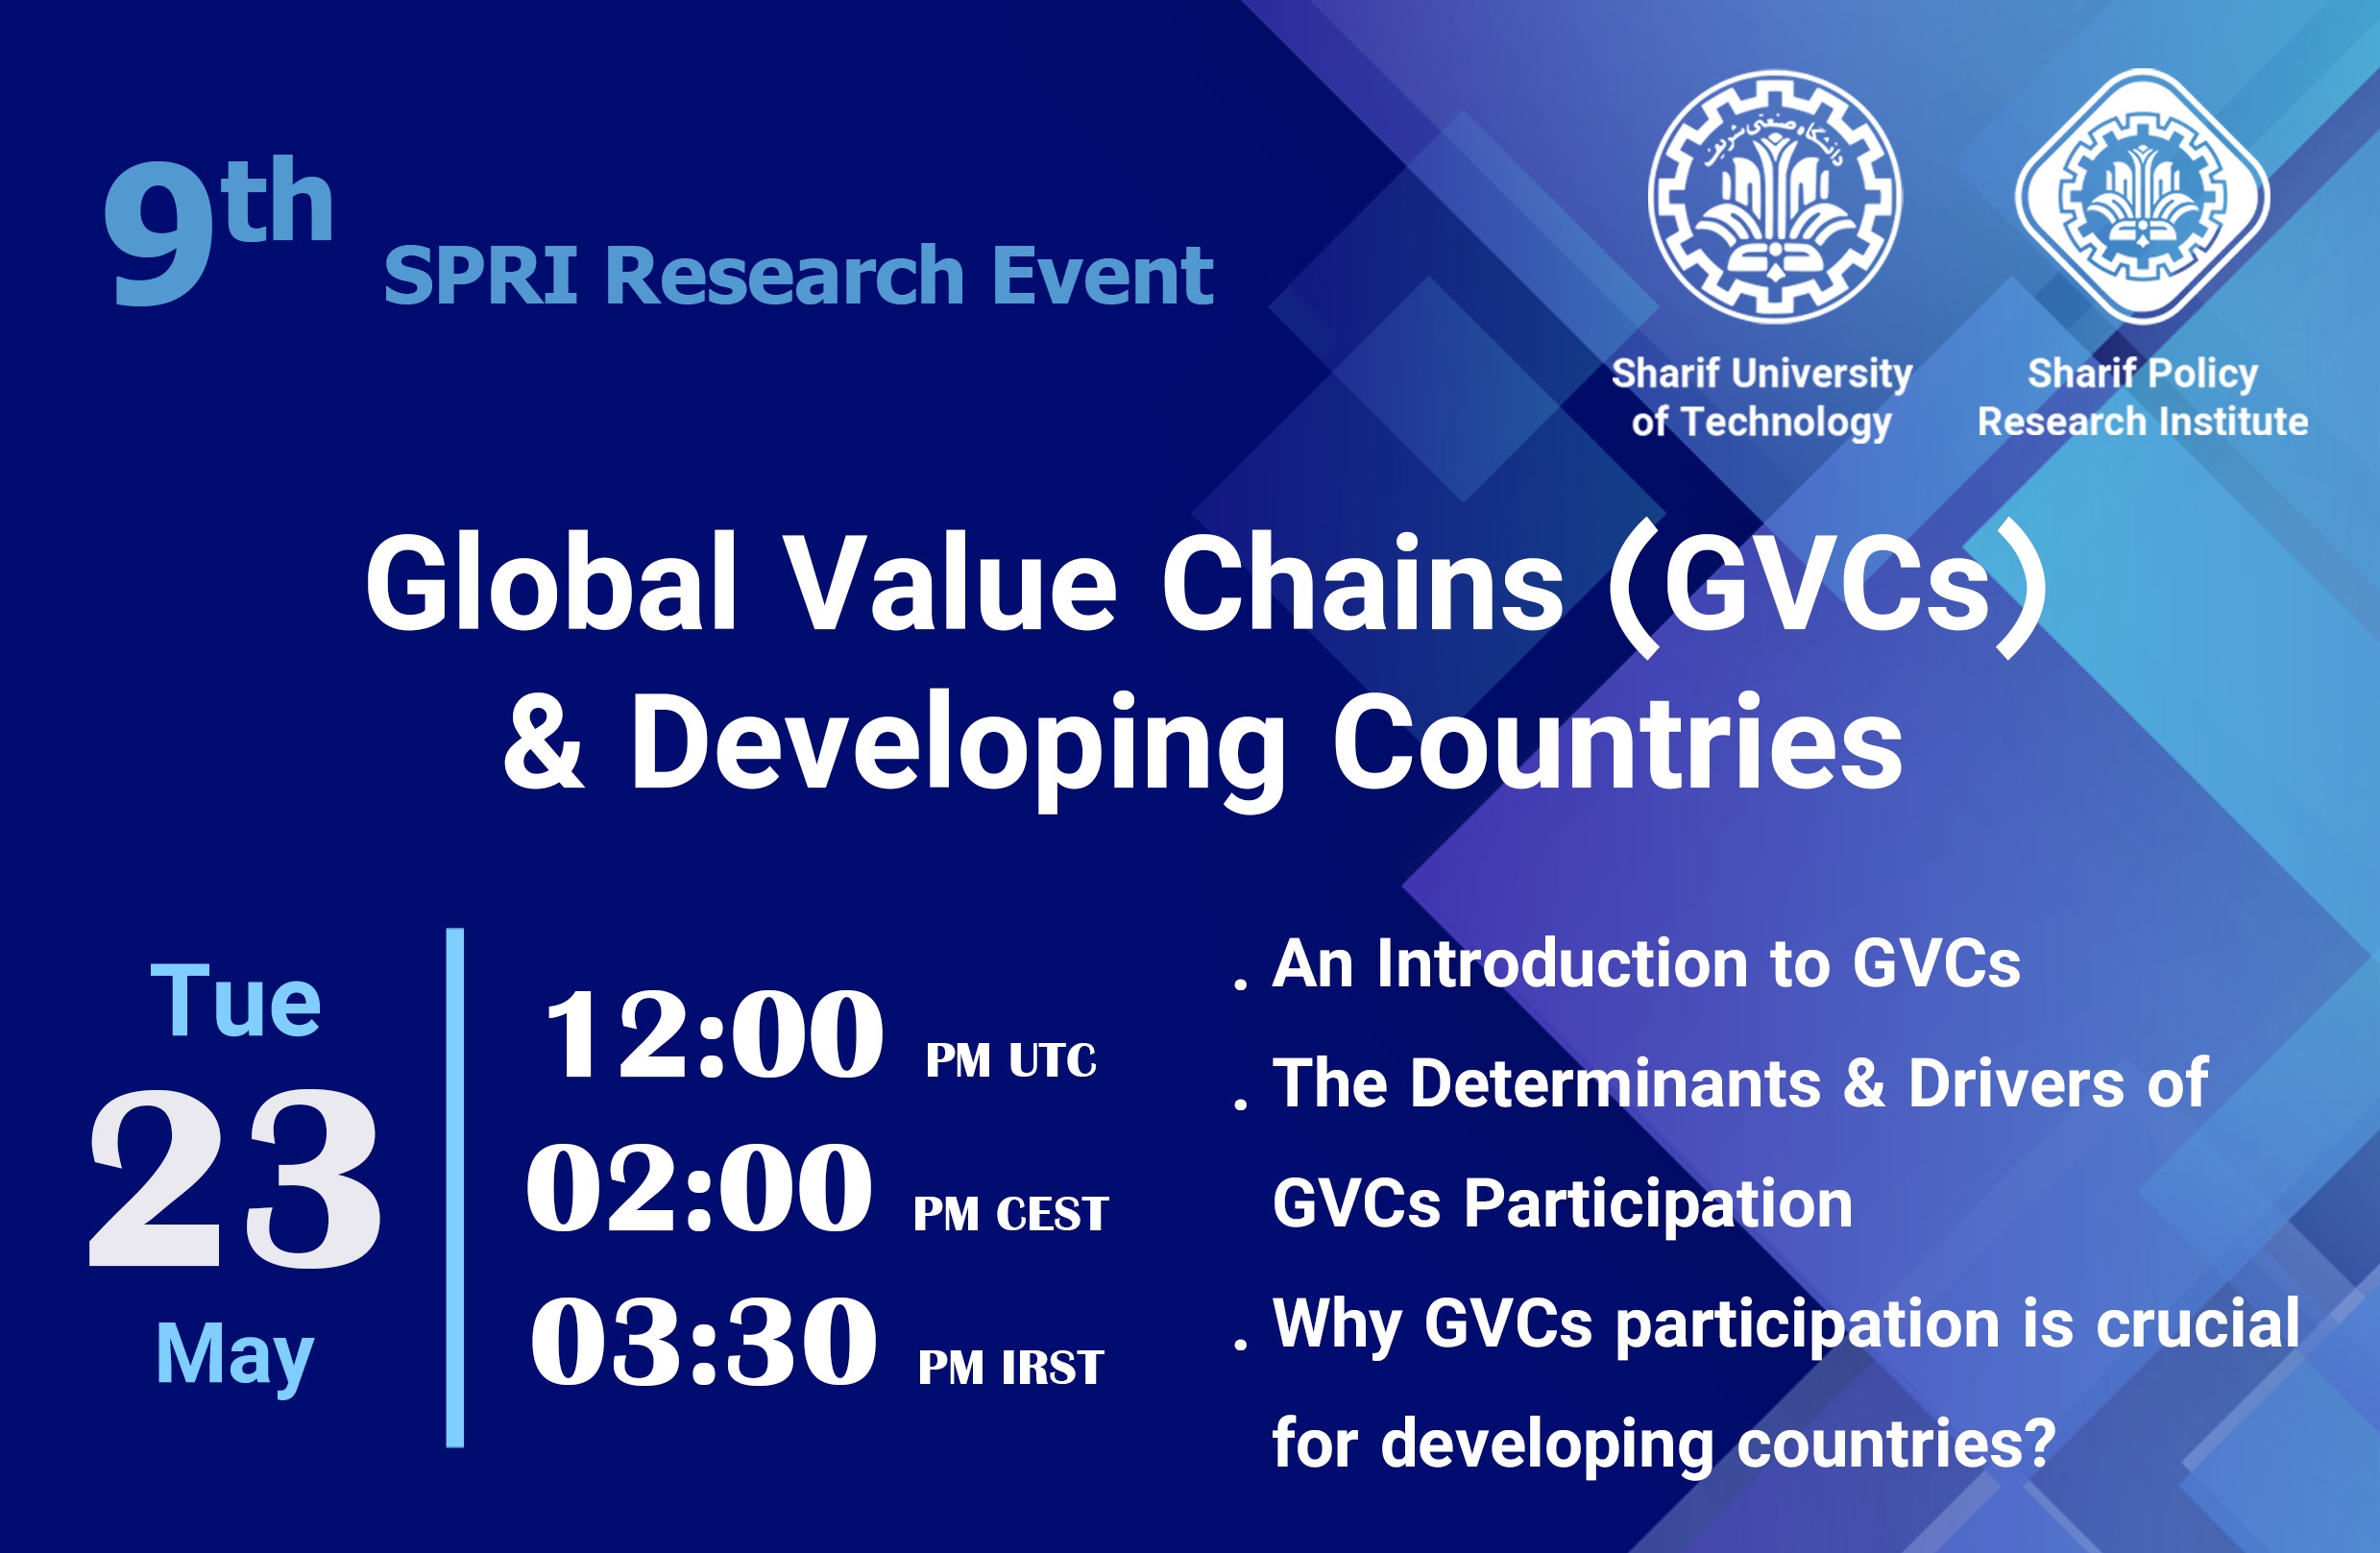 Global Value Chains (GVCs) & Developing Countries